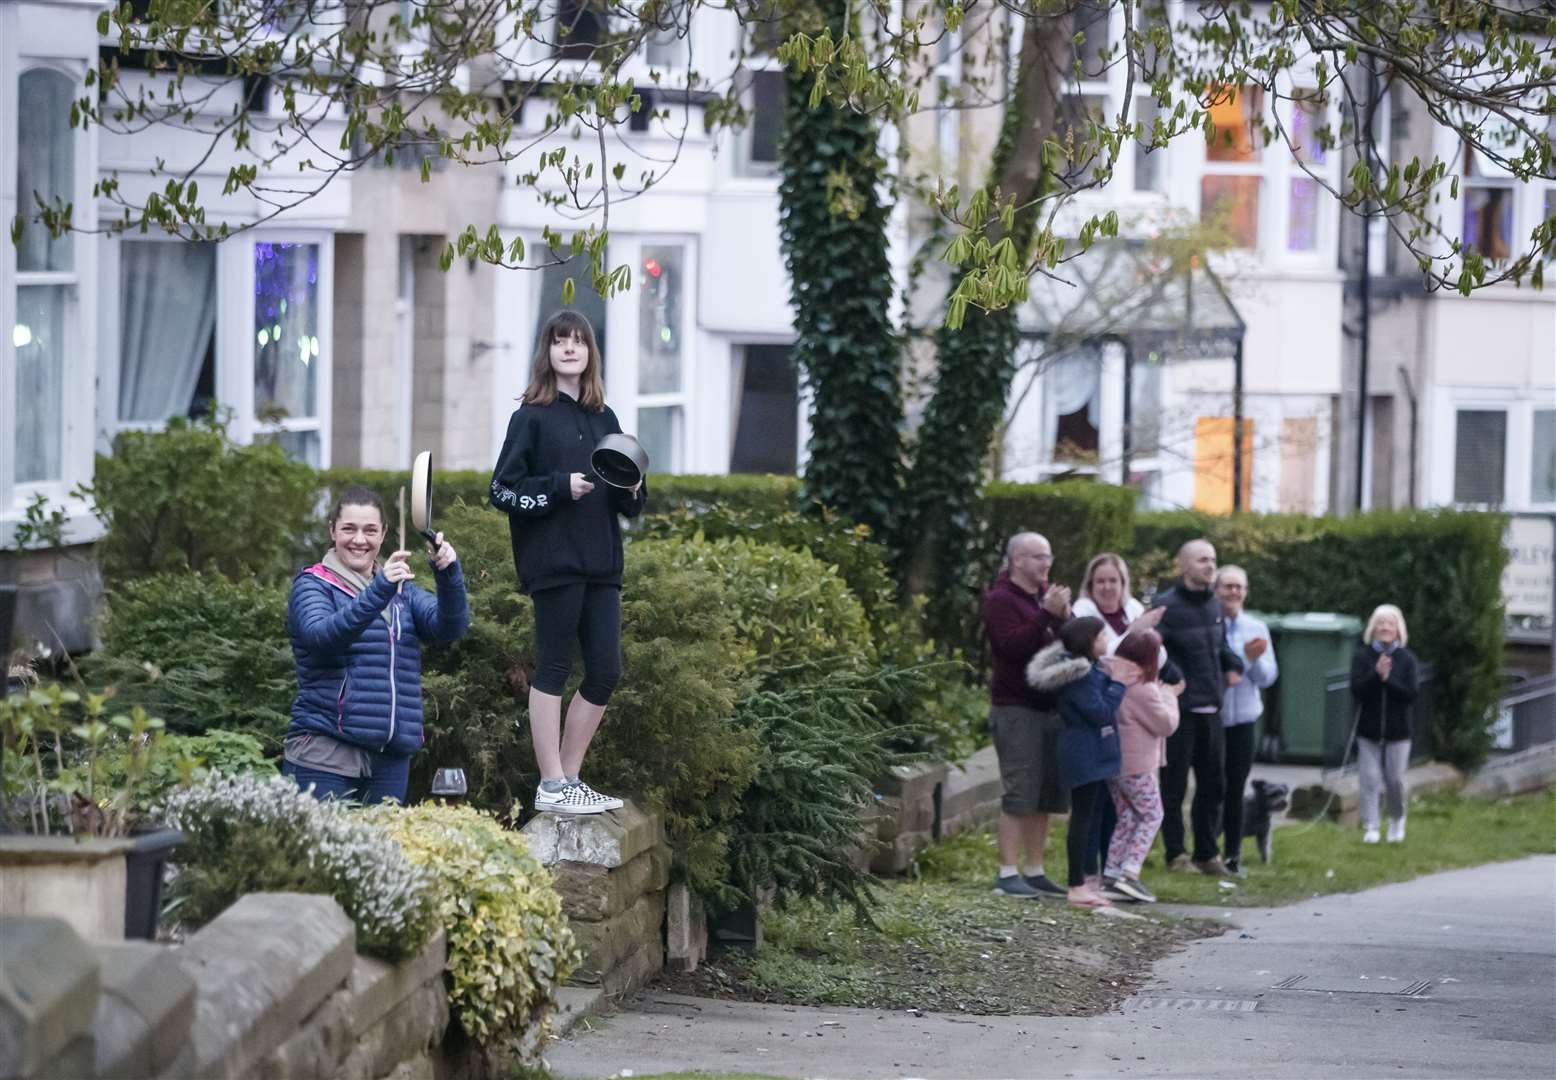 Local residents clapping outside the Nightingale Hospital at the Harrogate Convention Centre in April 2020 (PA)